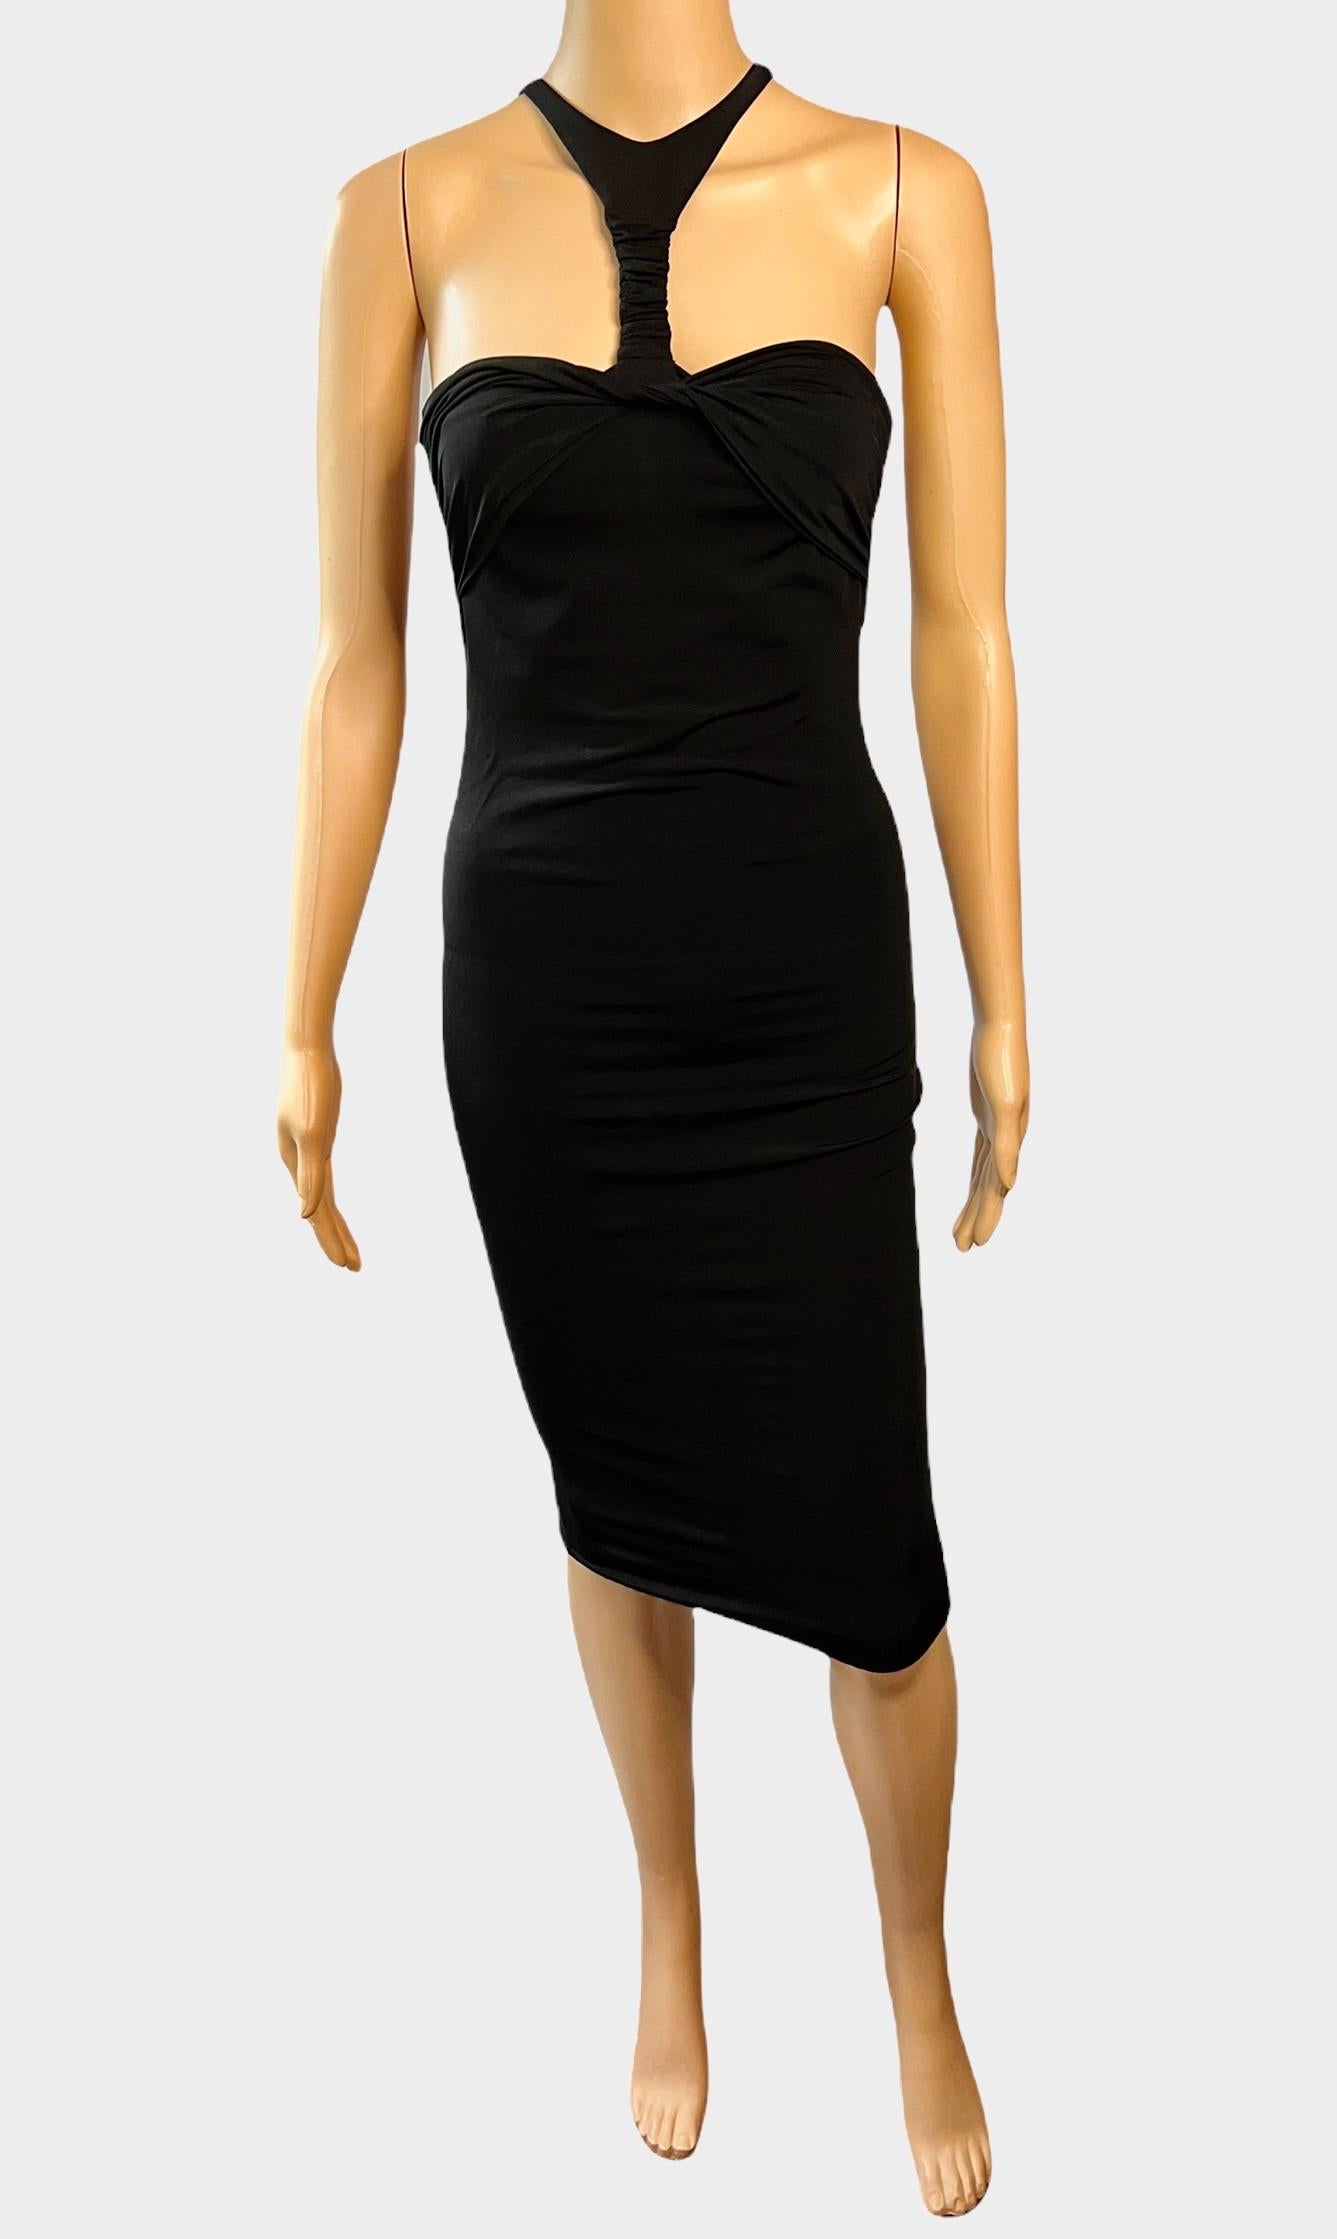 Tom Ford for Gucci F/W 2004 Plunging Cutout Black Evening Dress  For Sale 1